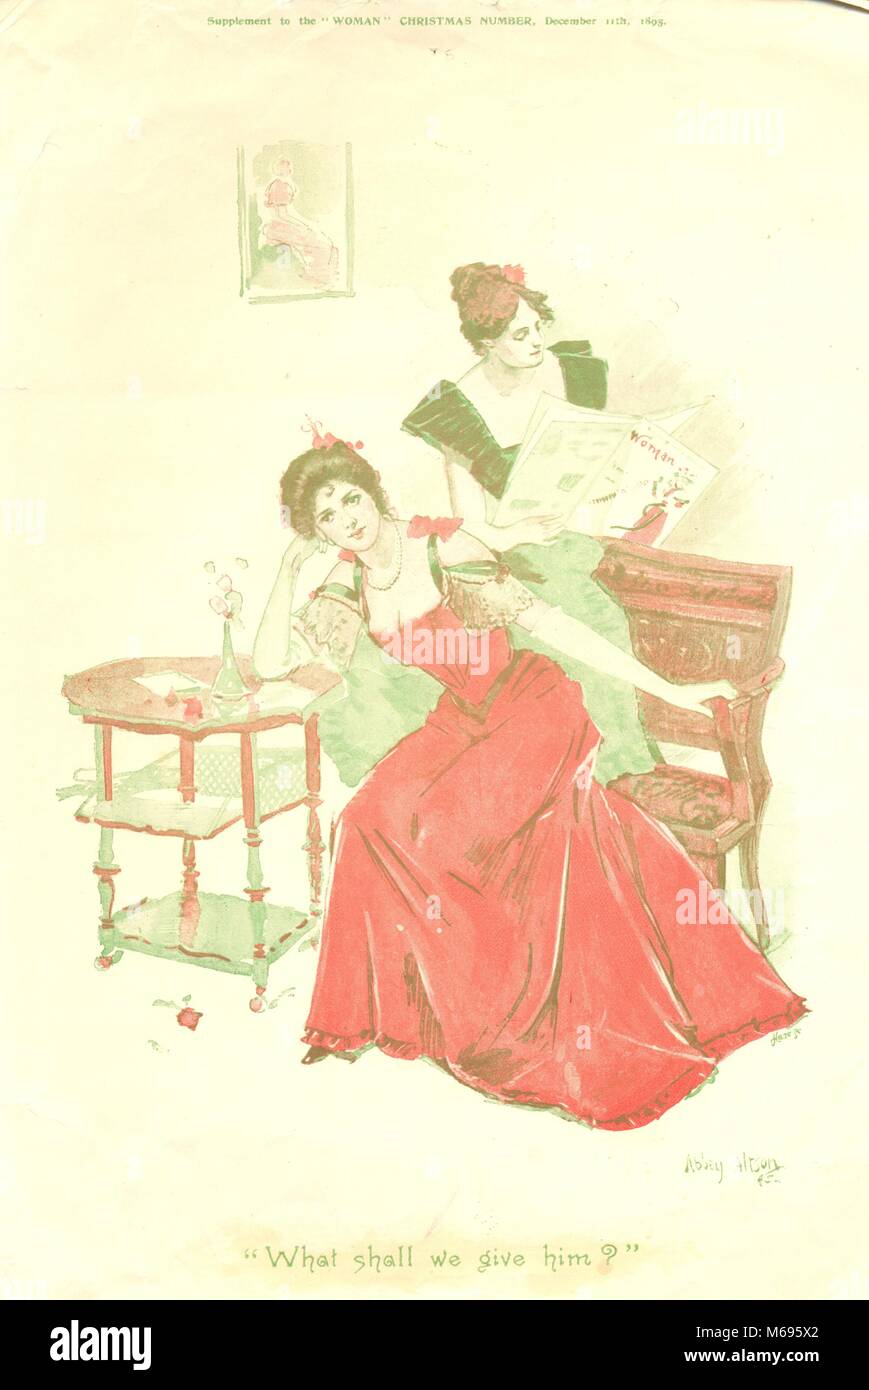 Supplement to Christmas Number of  'Woman' 1895 Stock Photo